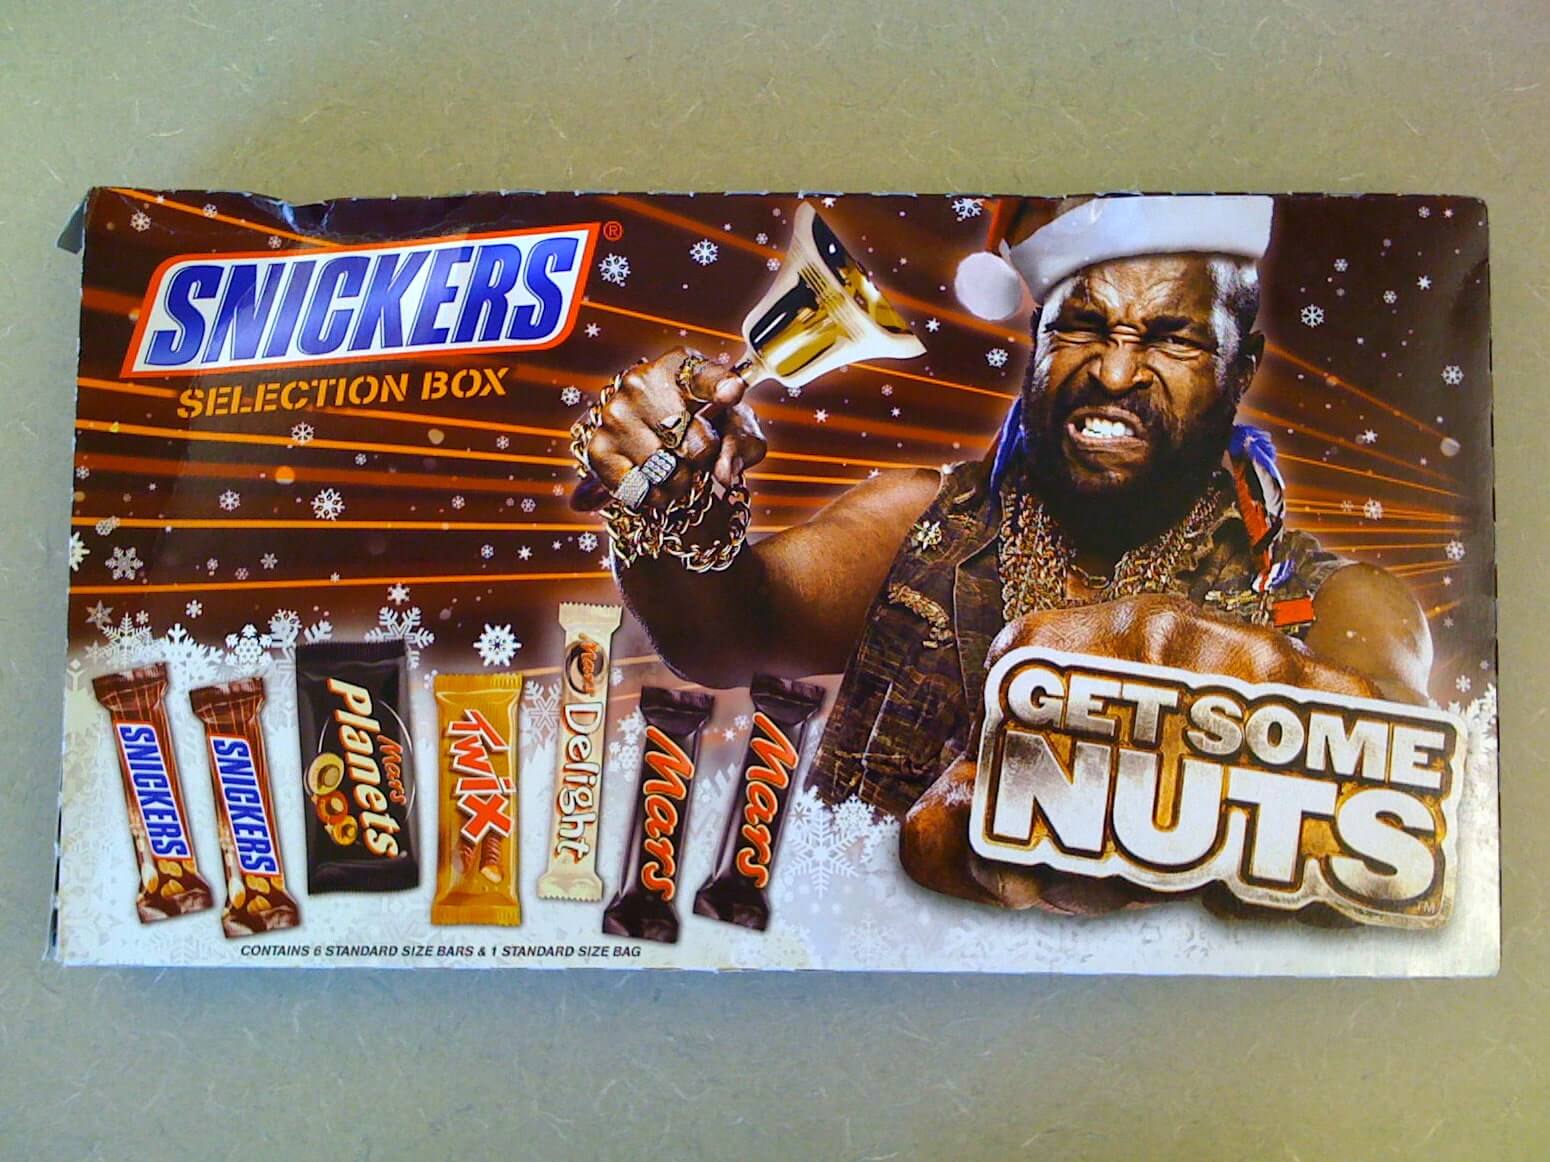 “Get Some Nuts!” (Snickers);